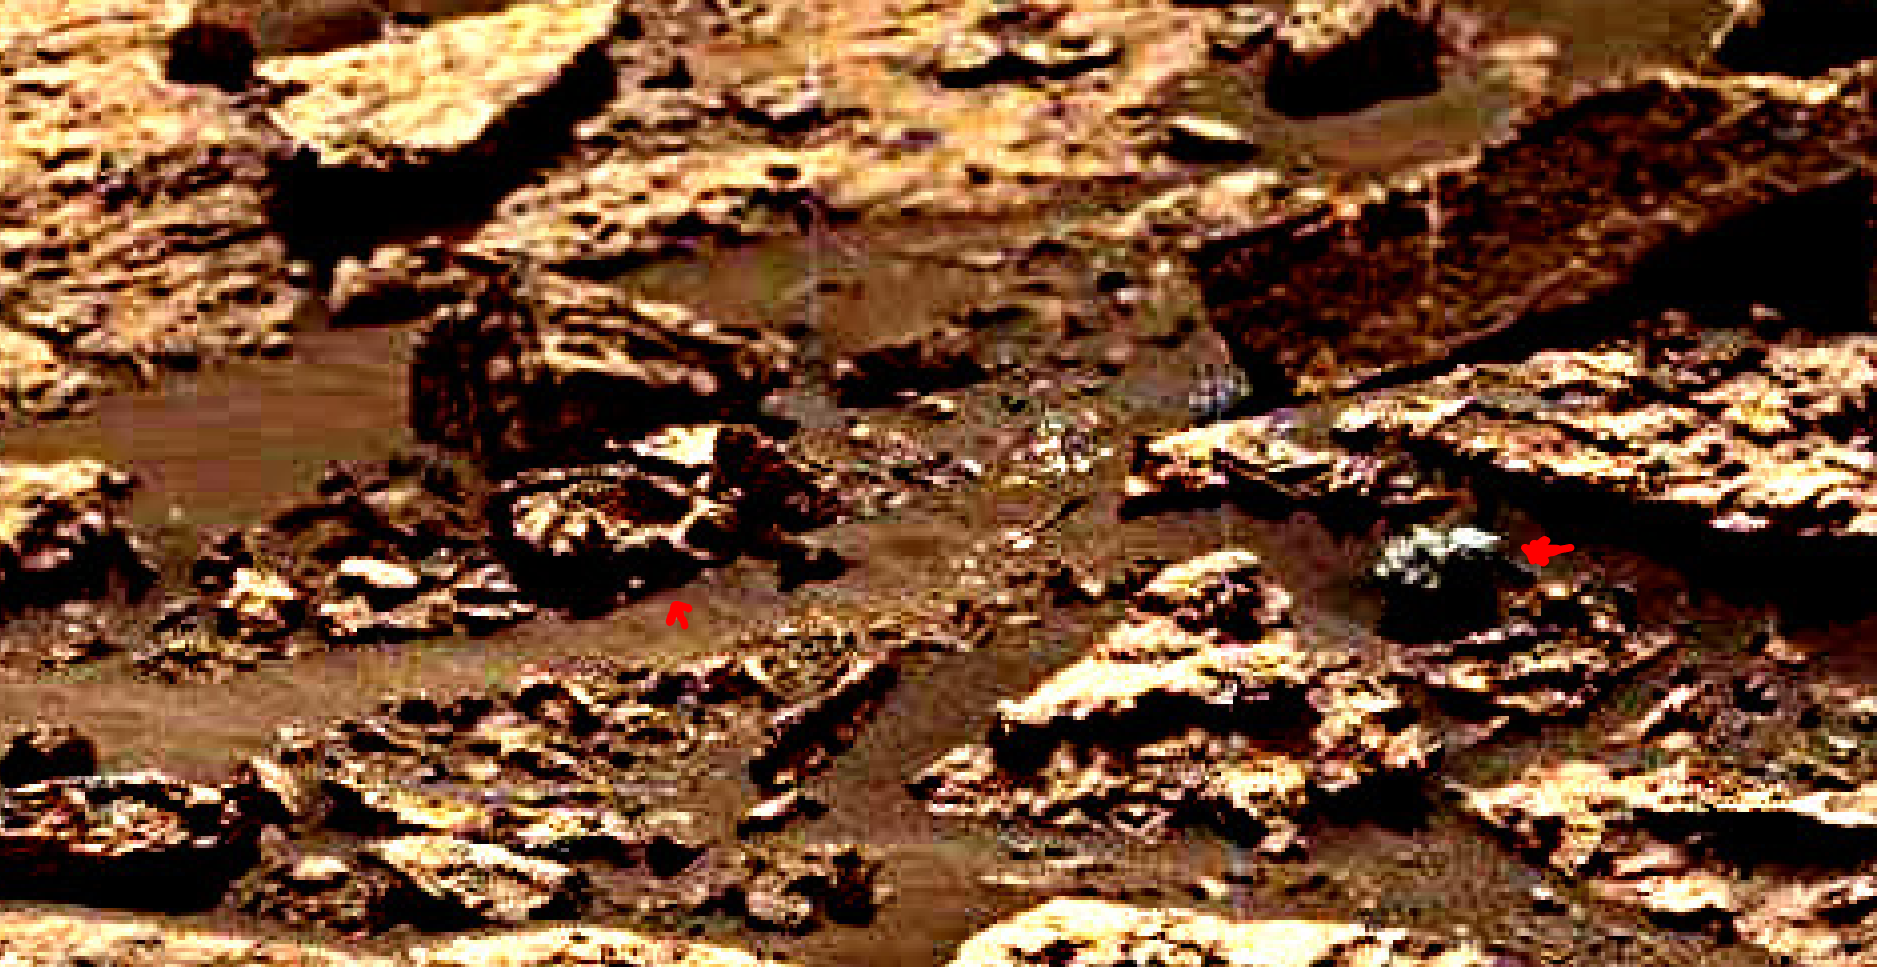 mars-sol-1485-anomaly-artifacts-11a-was-life-on-mars